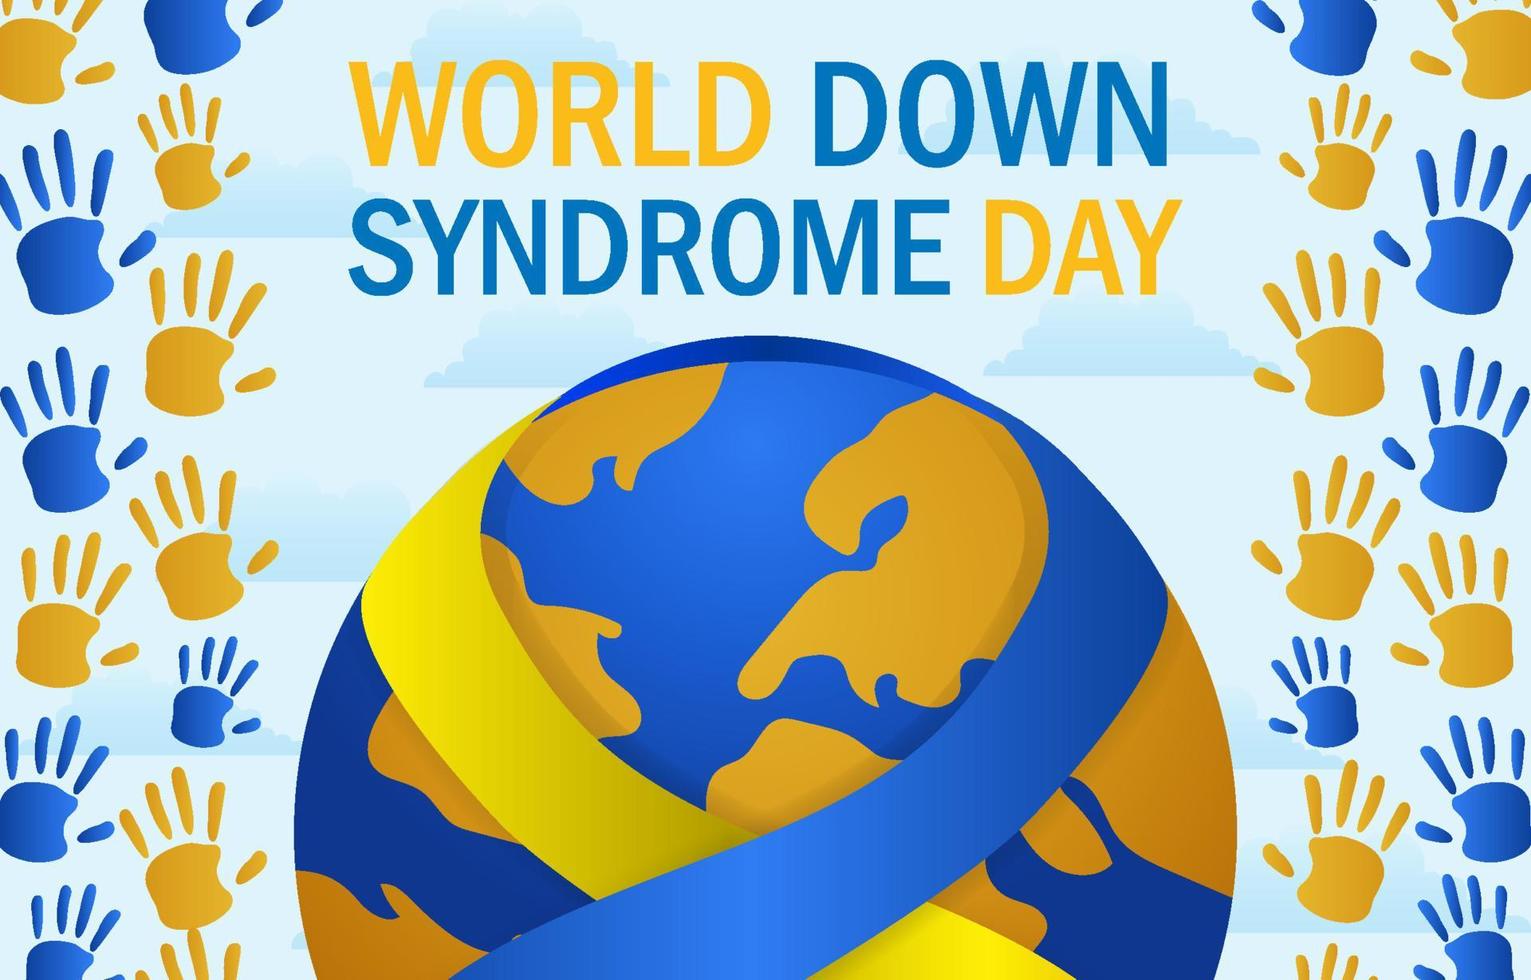 World Down Syndrome Day Background vector